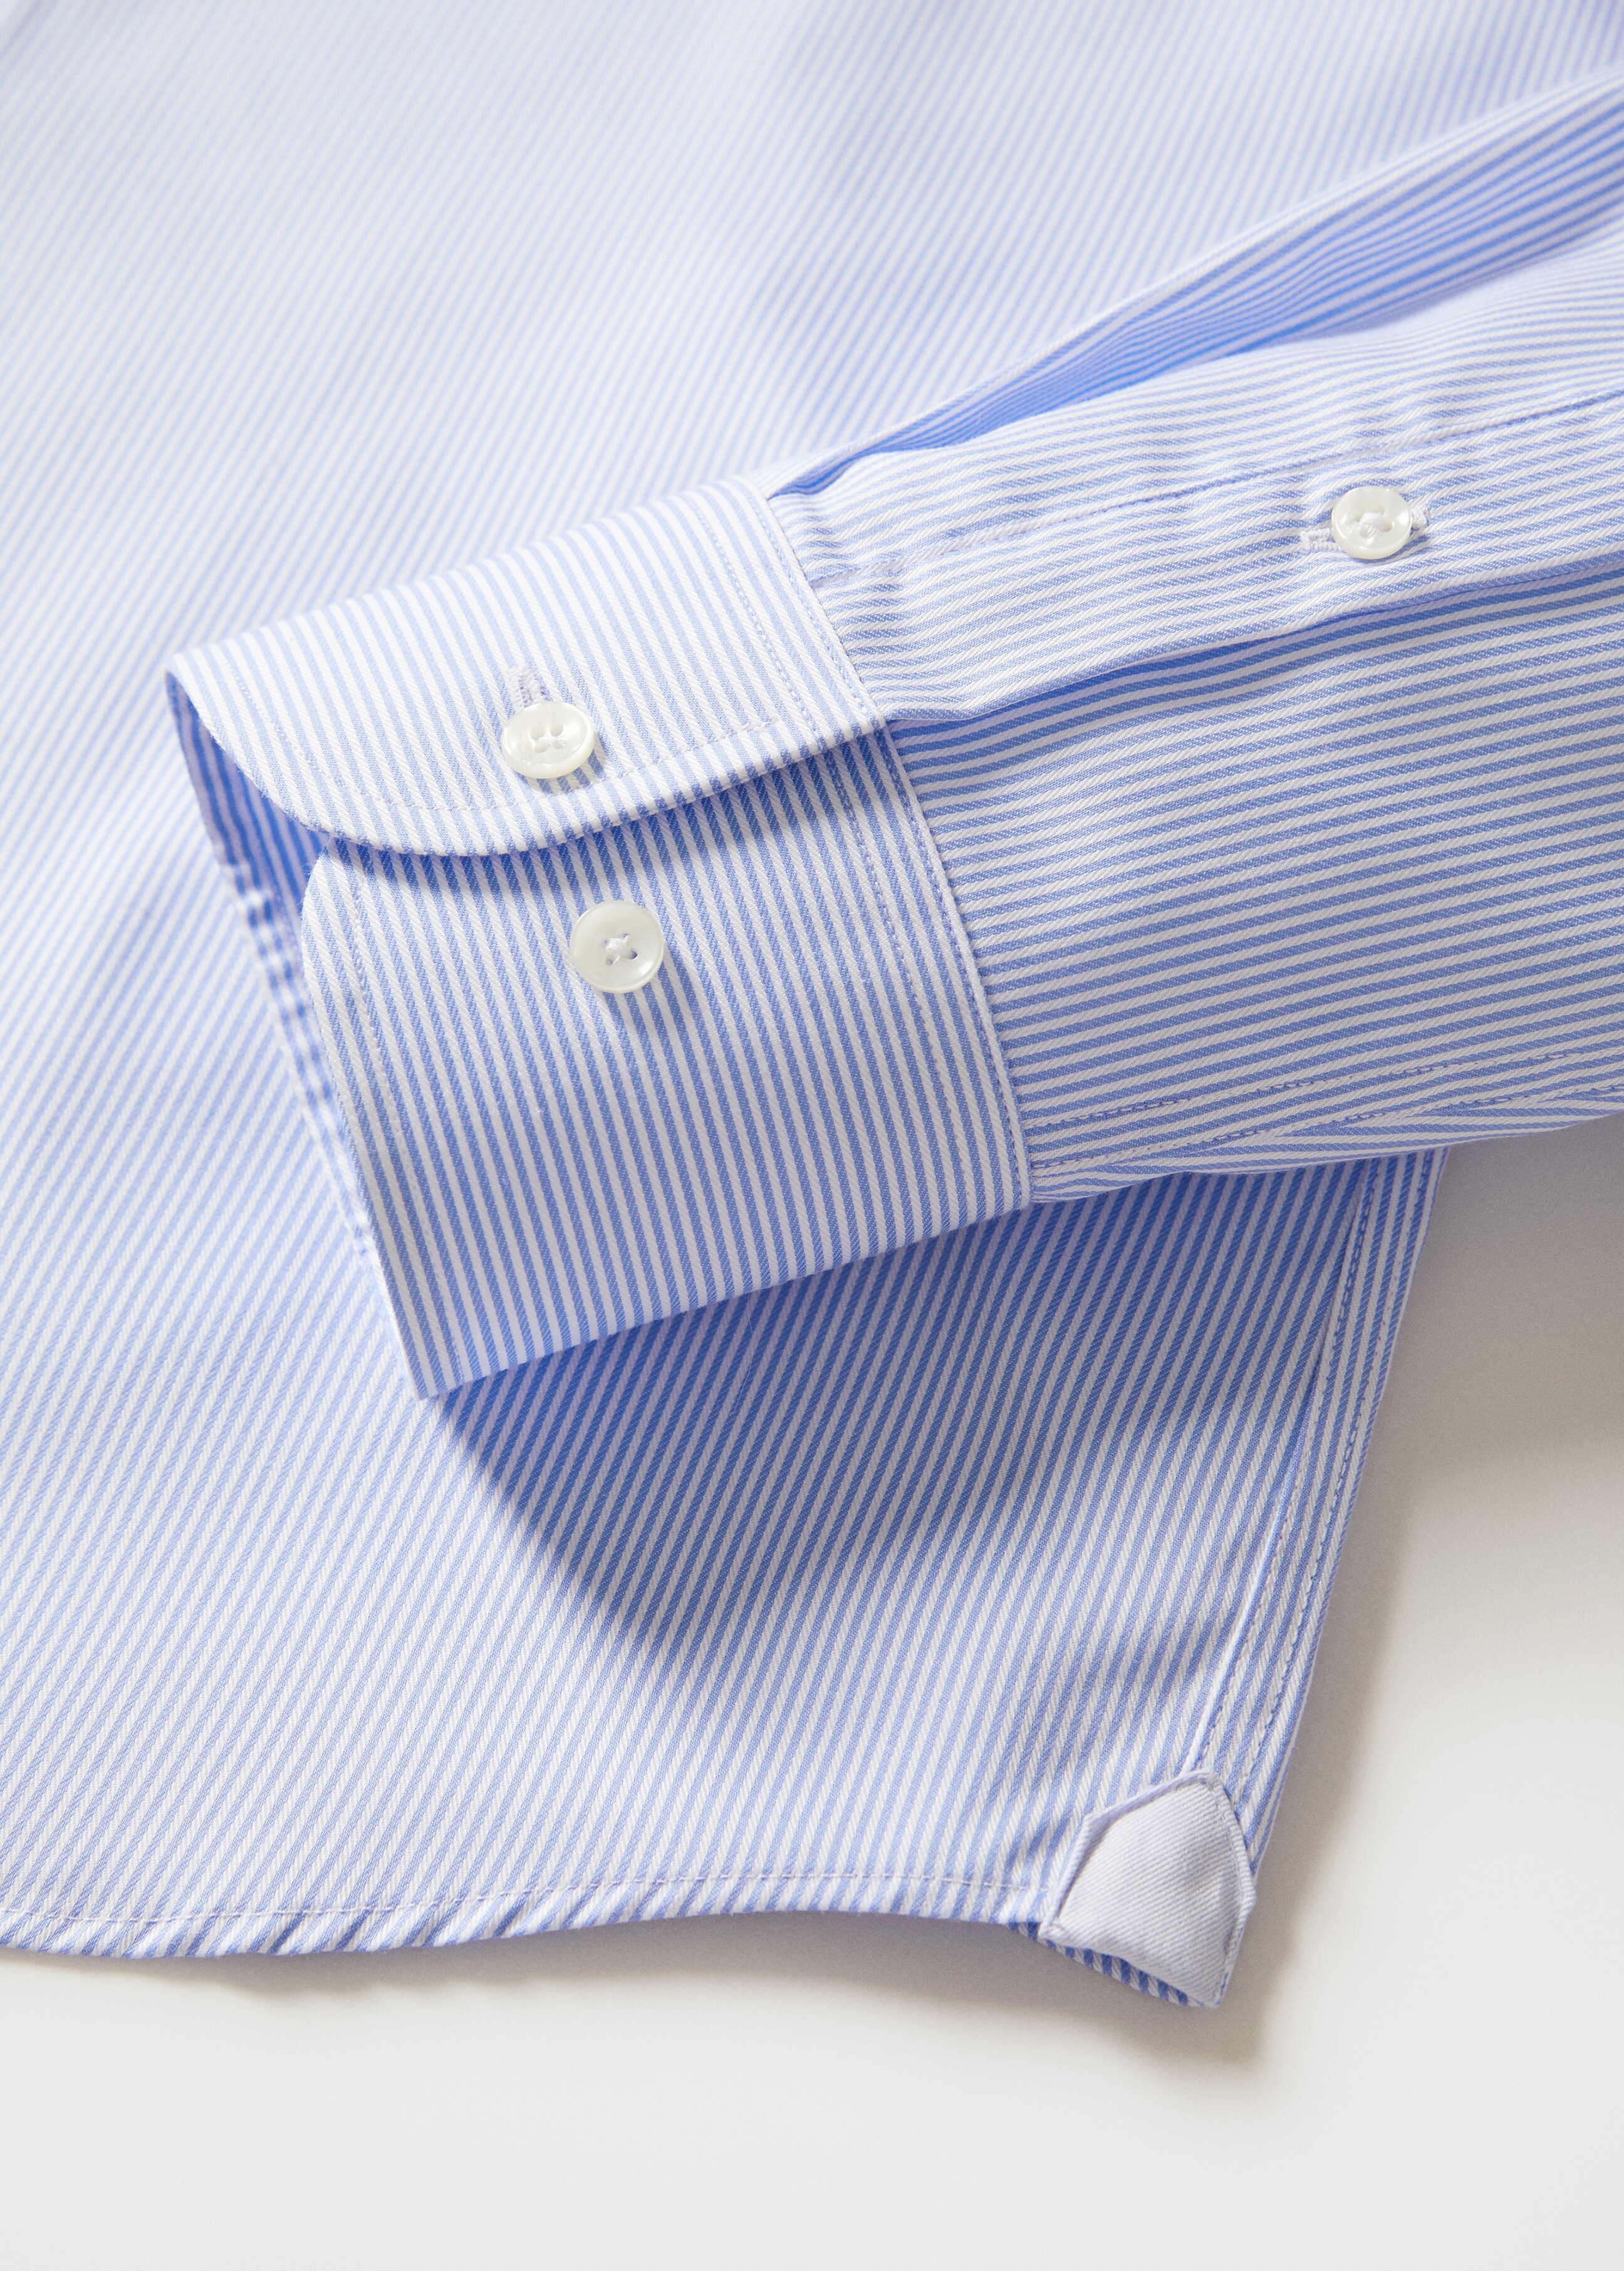 Slim fit thousand striped suit shirt - Details of the article 8